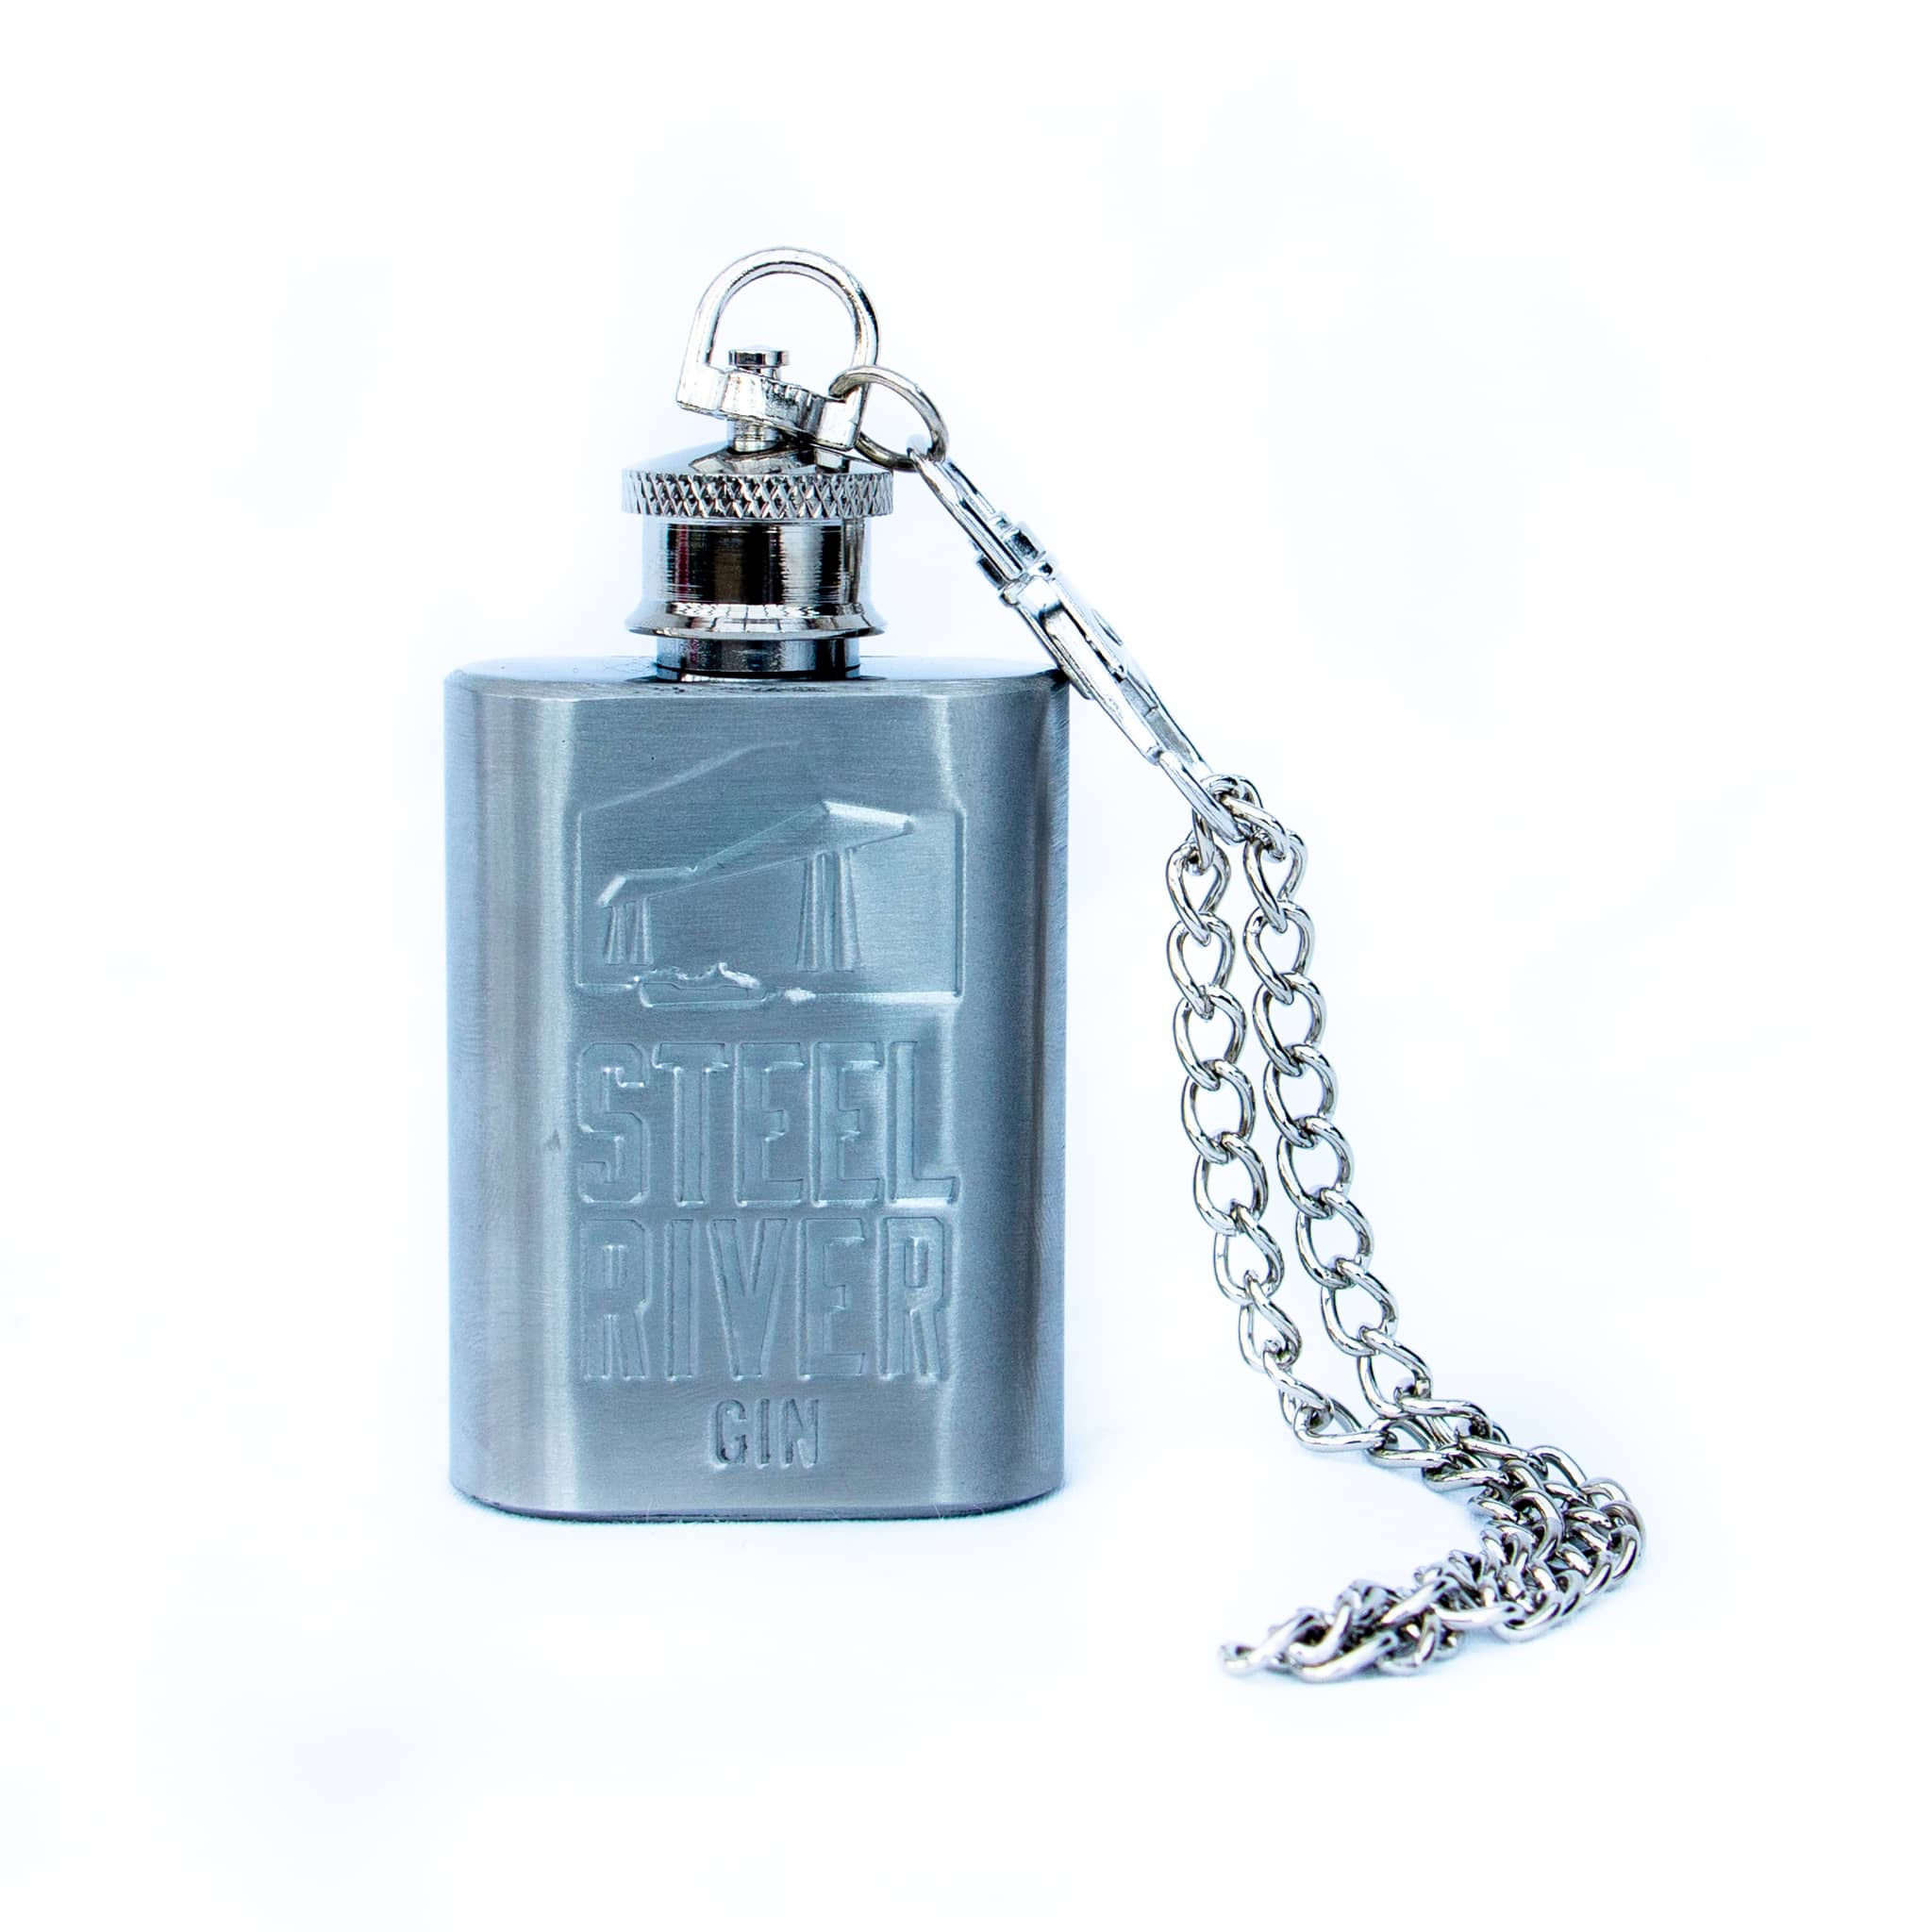 Silver Steel River Gin Flask, decorated with Steel River bottle logo design on front.